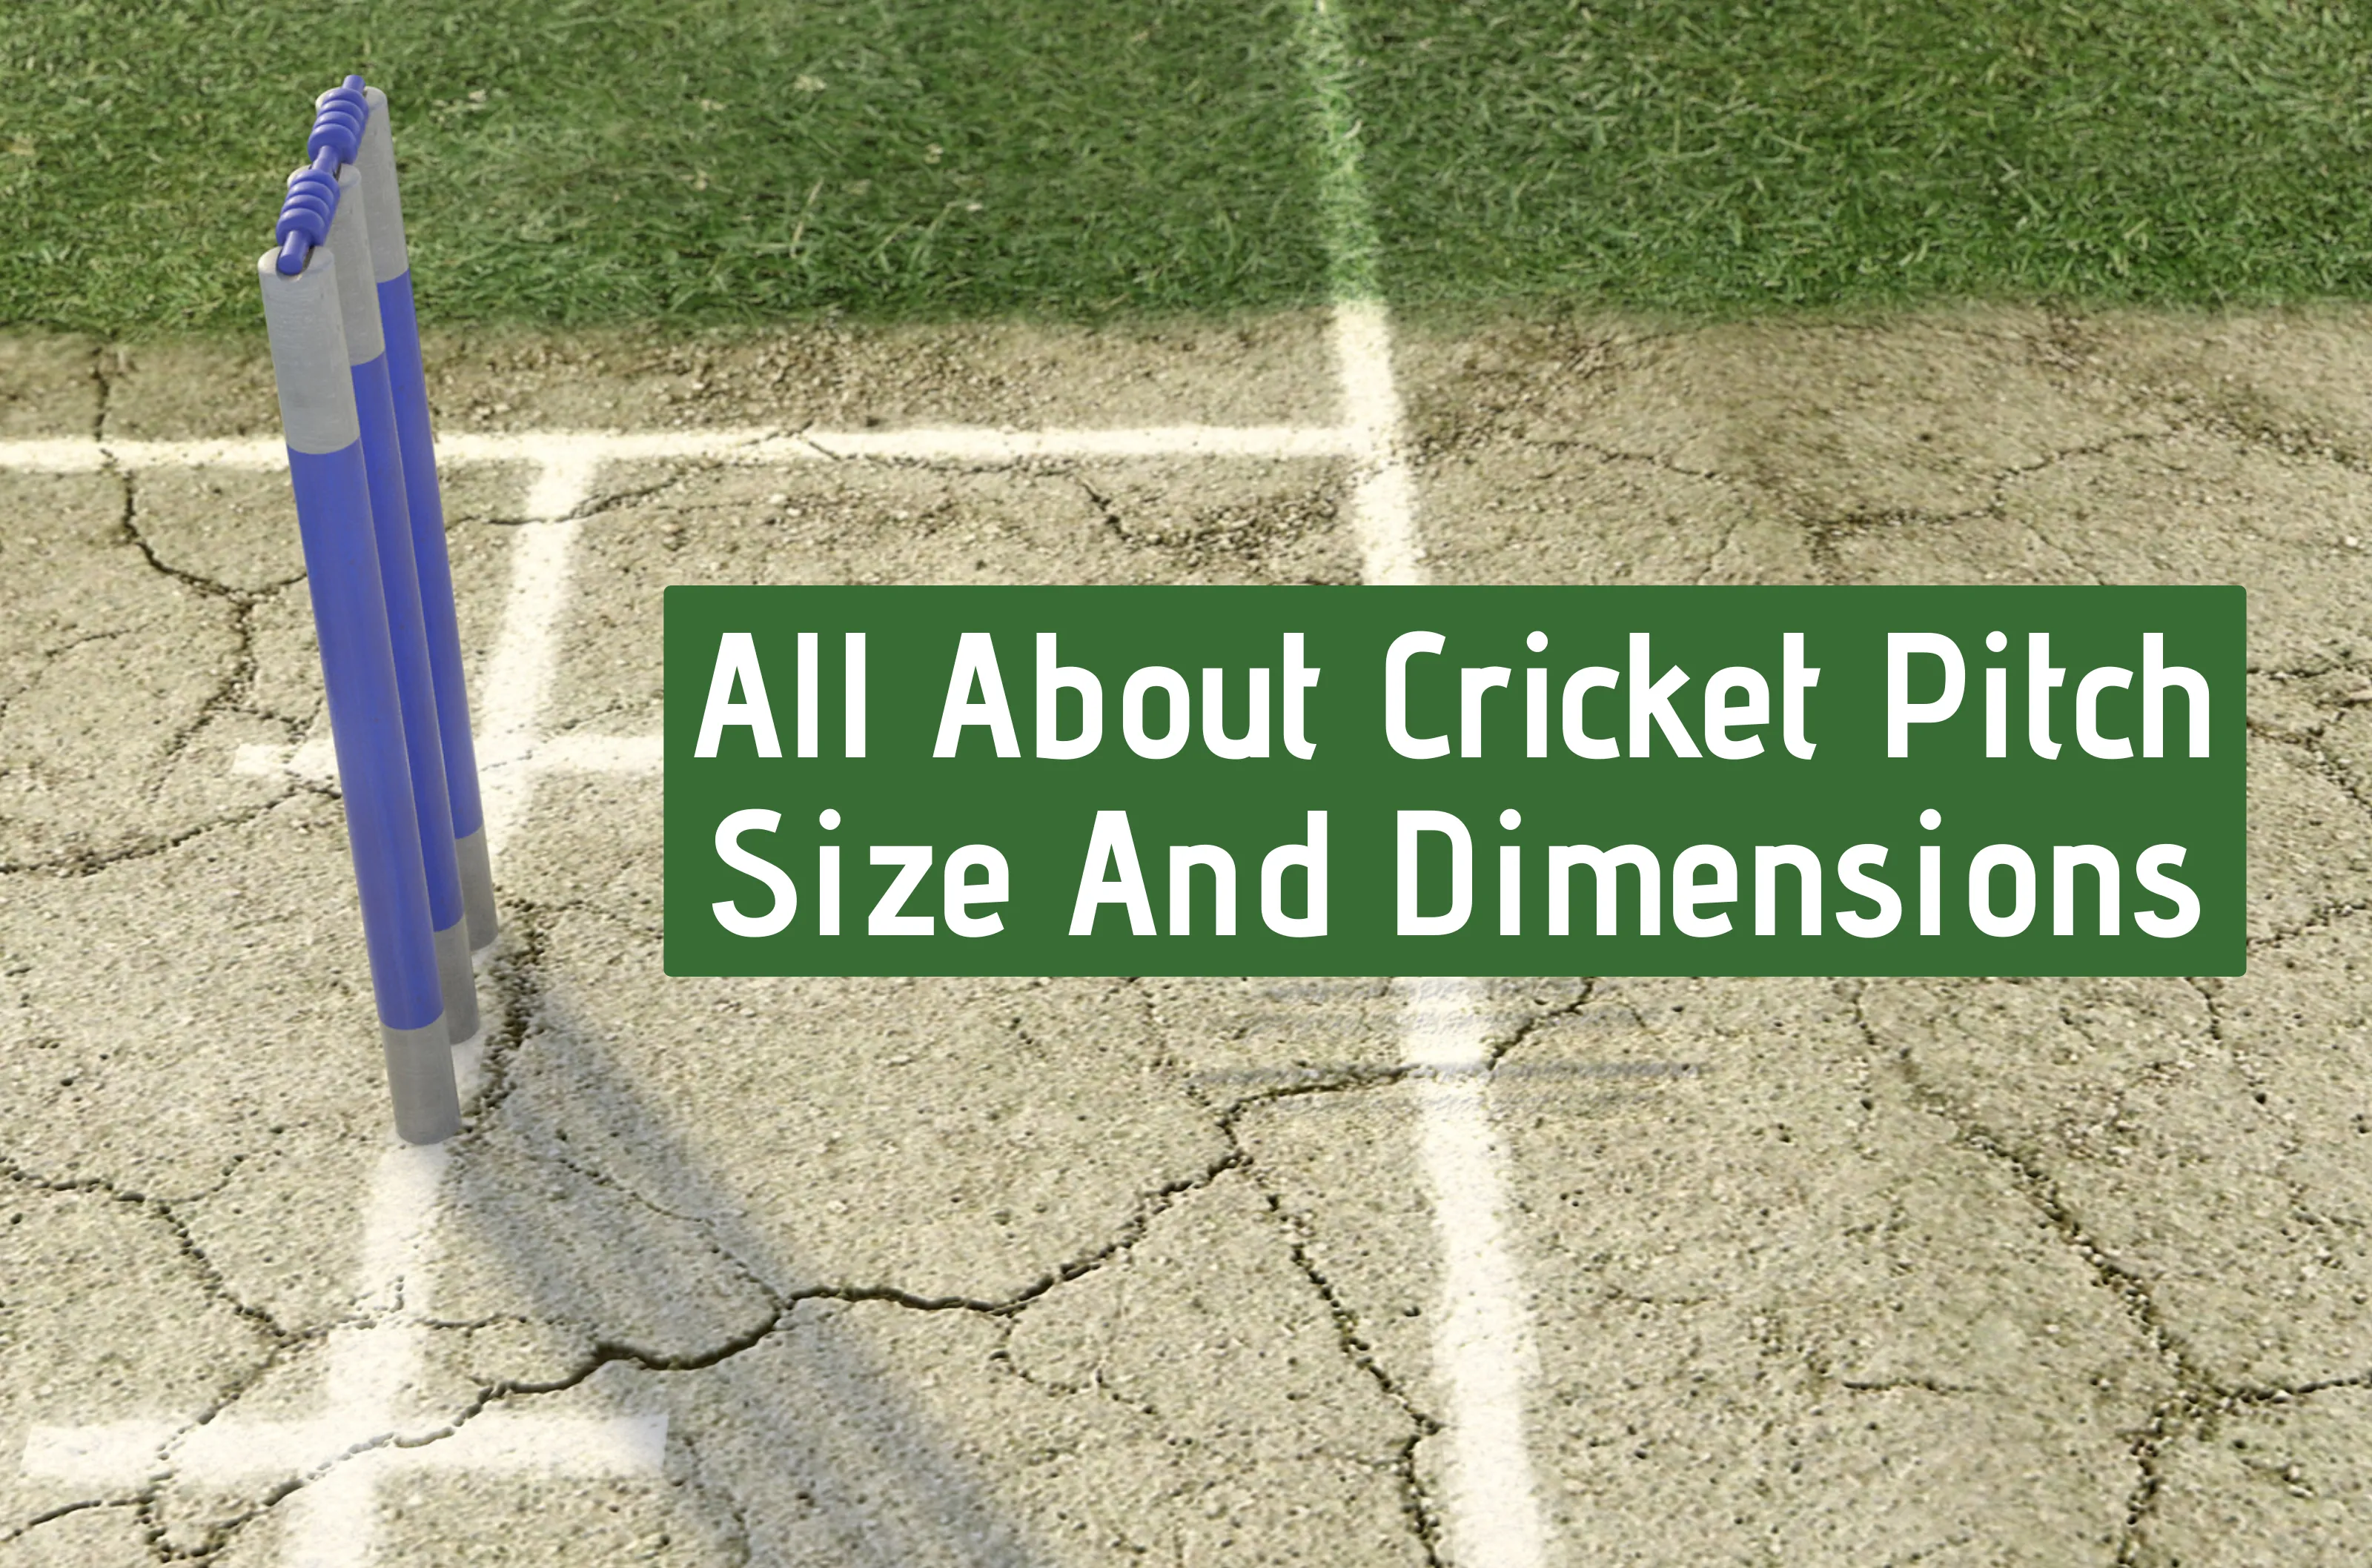 All About Cricket Pitch Size And Dimensions blog header.webp